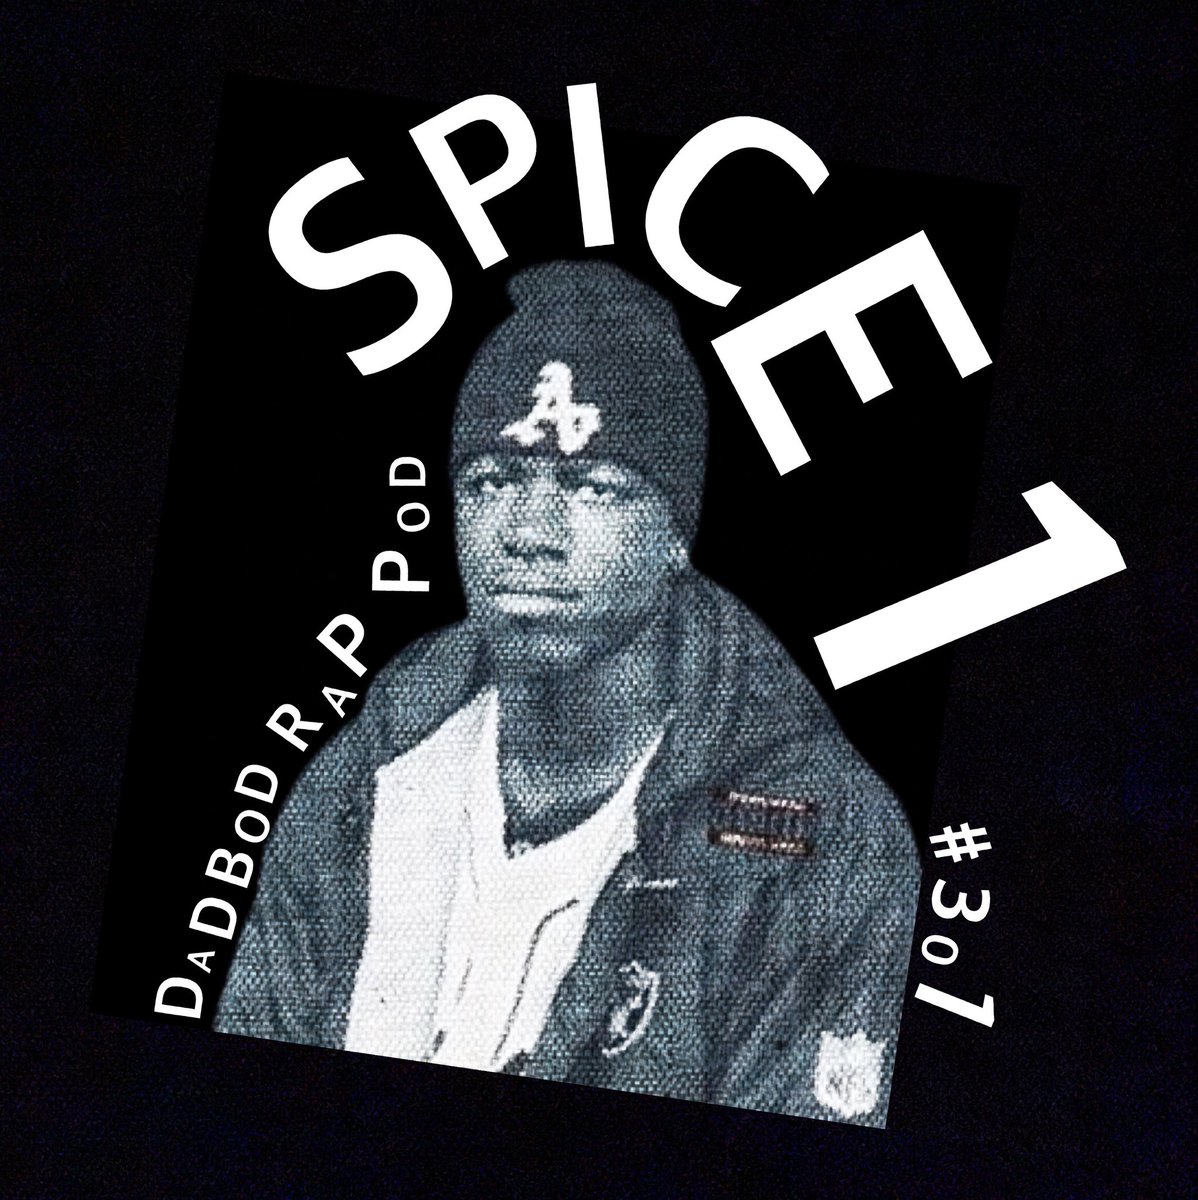 NEW EPISODE!!!! We talk to Spice 1 about his legendary career, his friendship with Tupac, and almost landing a life changing movie role. Tap In! linktr.ee/DBRP